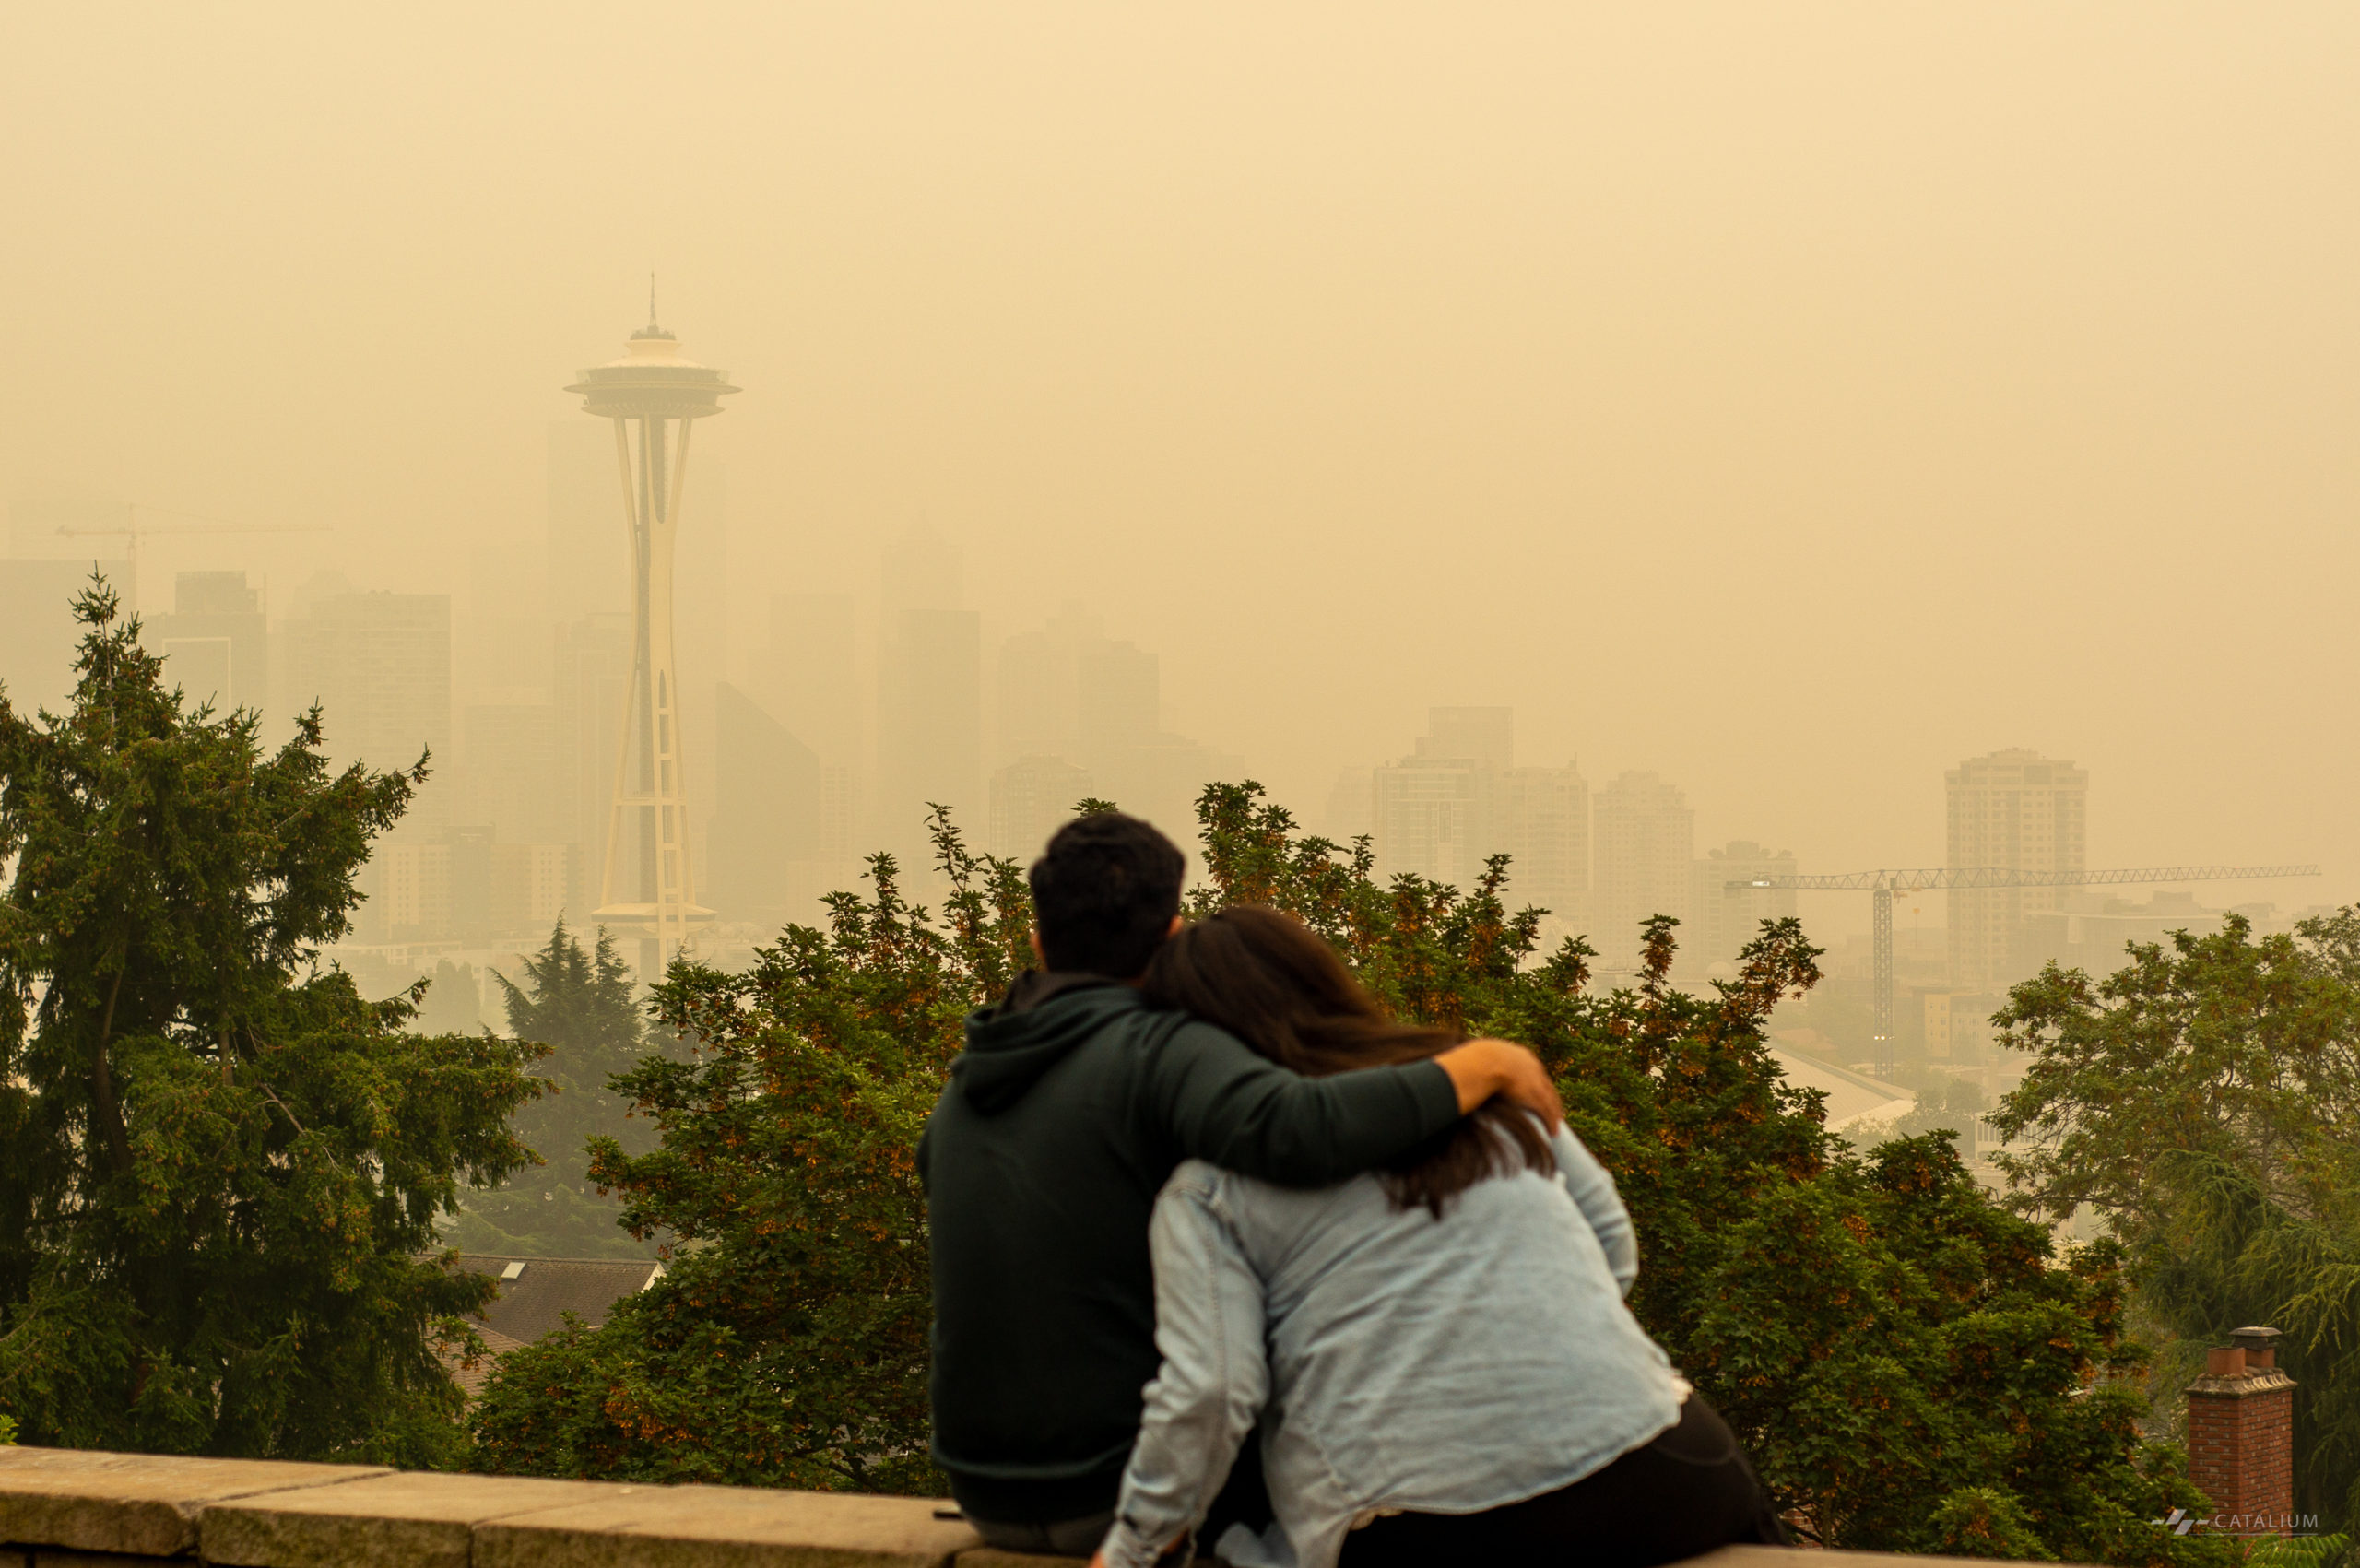 Photo taken at Kerry Park in September 2020. Heavy smoke from wildfire covered Seattle.